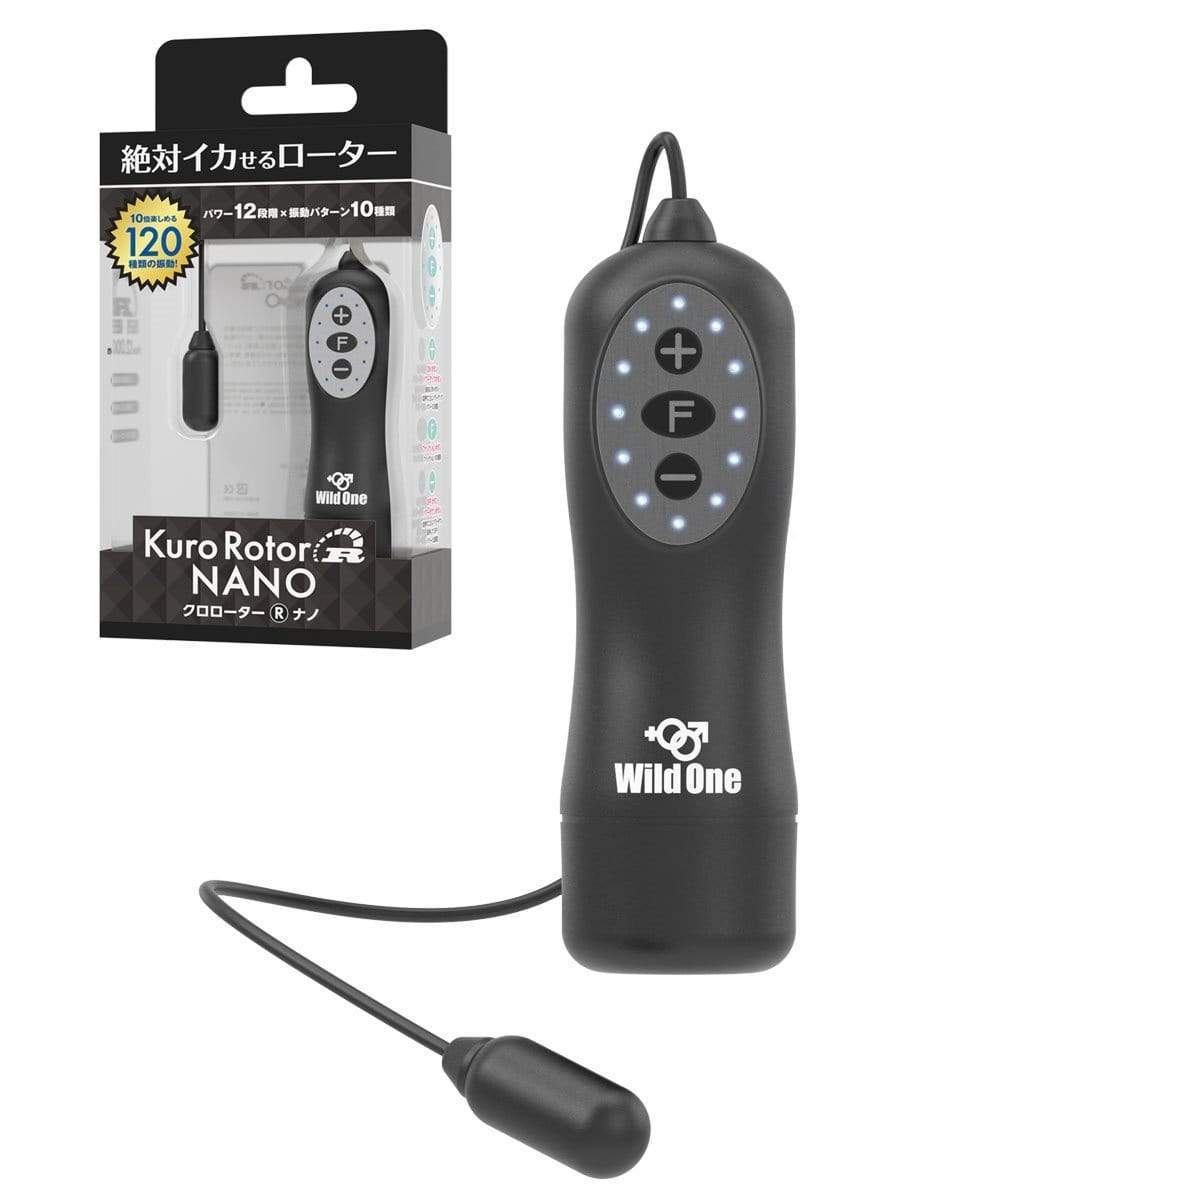 SSI Japan - Kuro Roter Nano Mini Bullet Egg Massager (Black) Wired Remote Control Egg (Vibration) Non Rechargeable 4582137932905 CherryAffairs